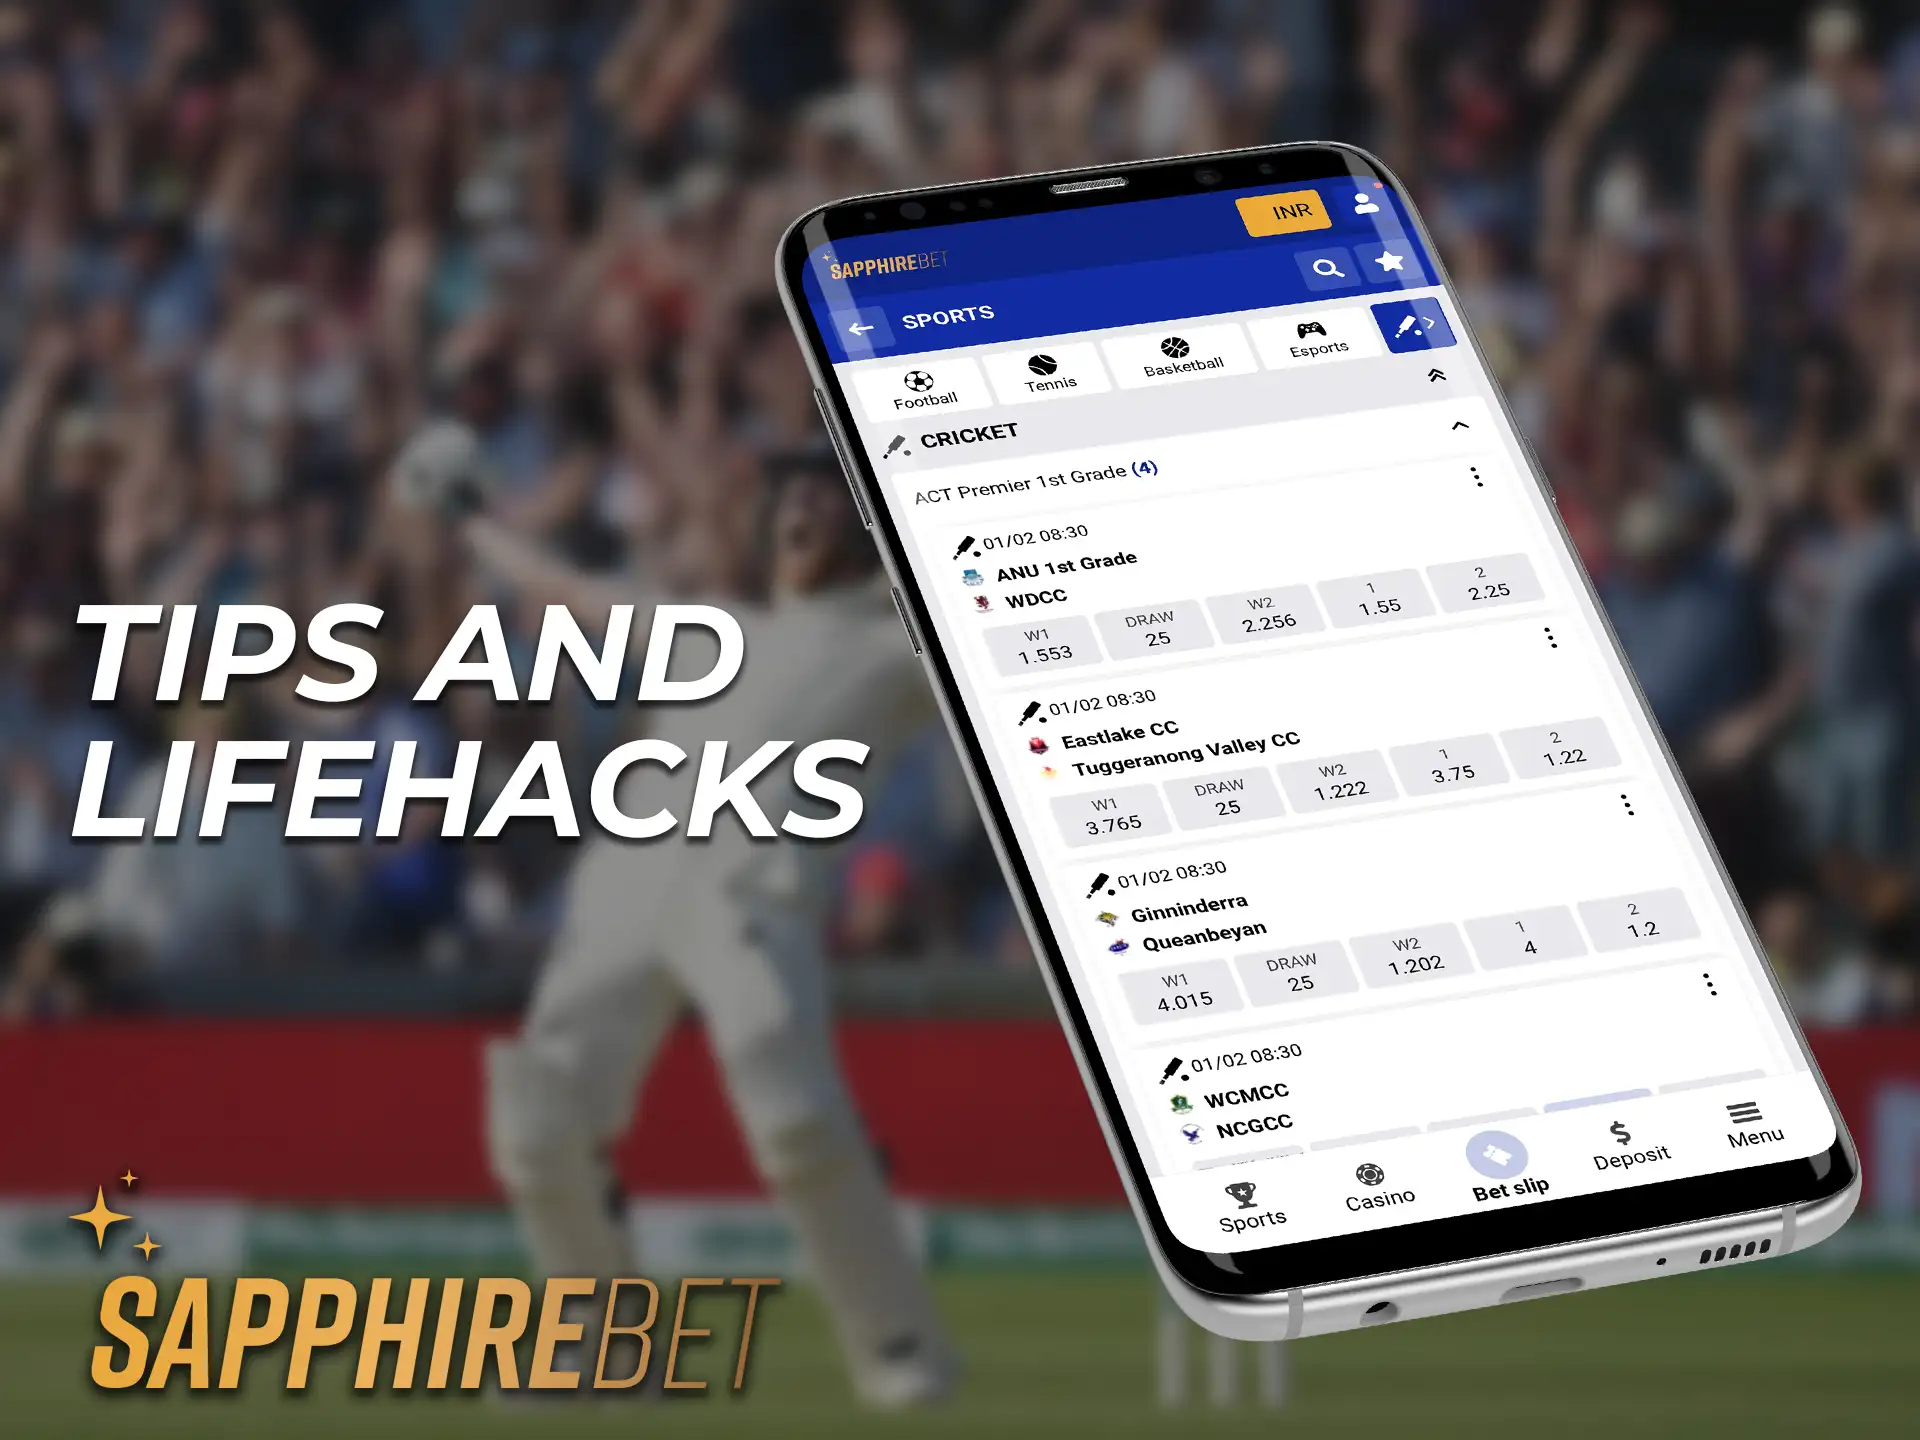 To increase your odds of success use useful tips and lifehacks from SapphireBet.